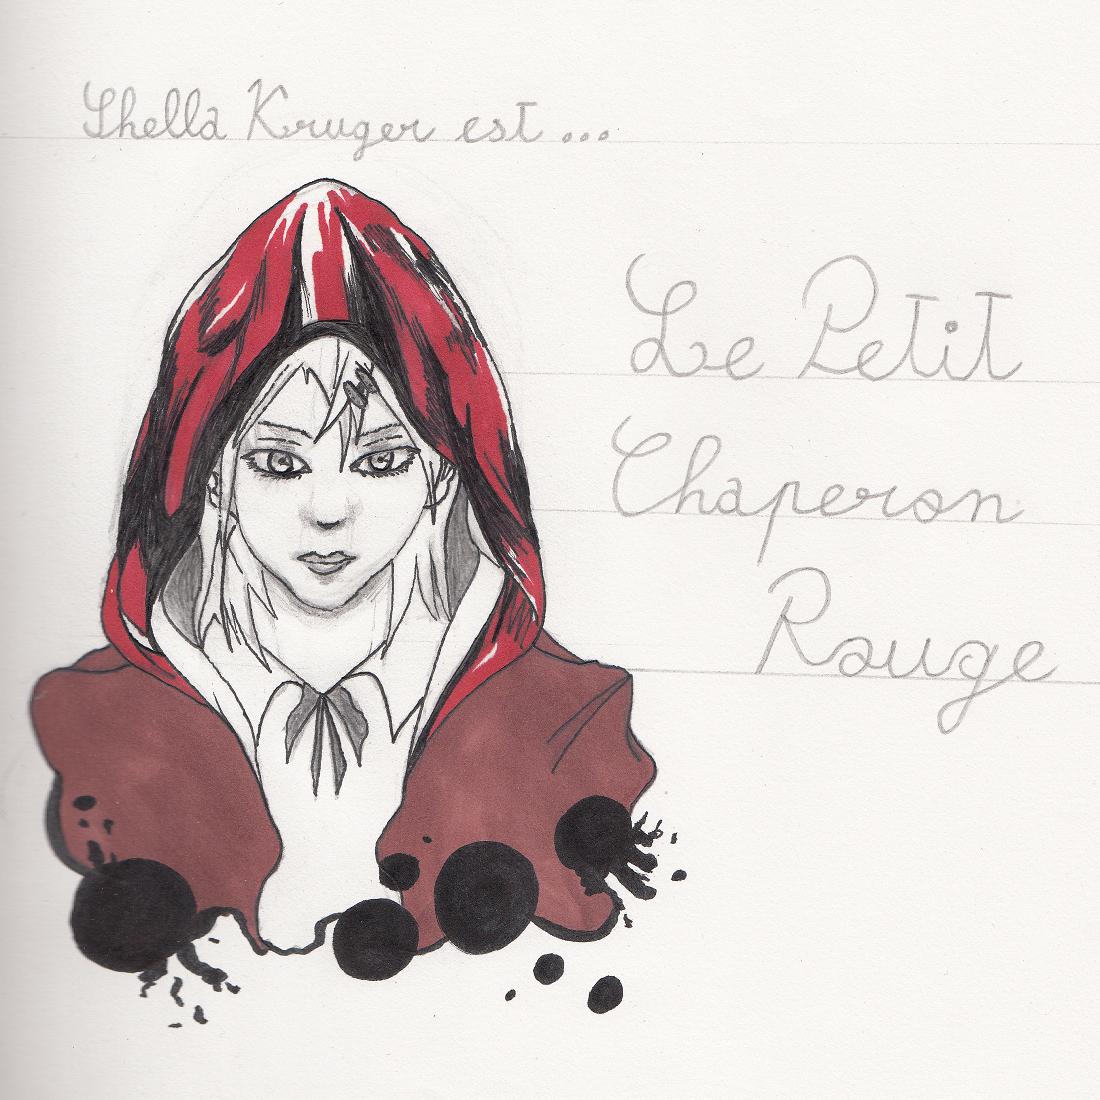 (Musée Yami) Door To Darkness, Le Petit Chaperon Rouge, 27 One_sh10